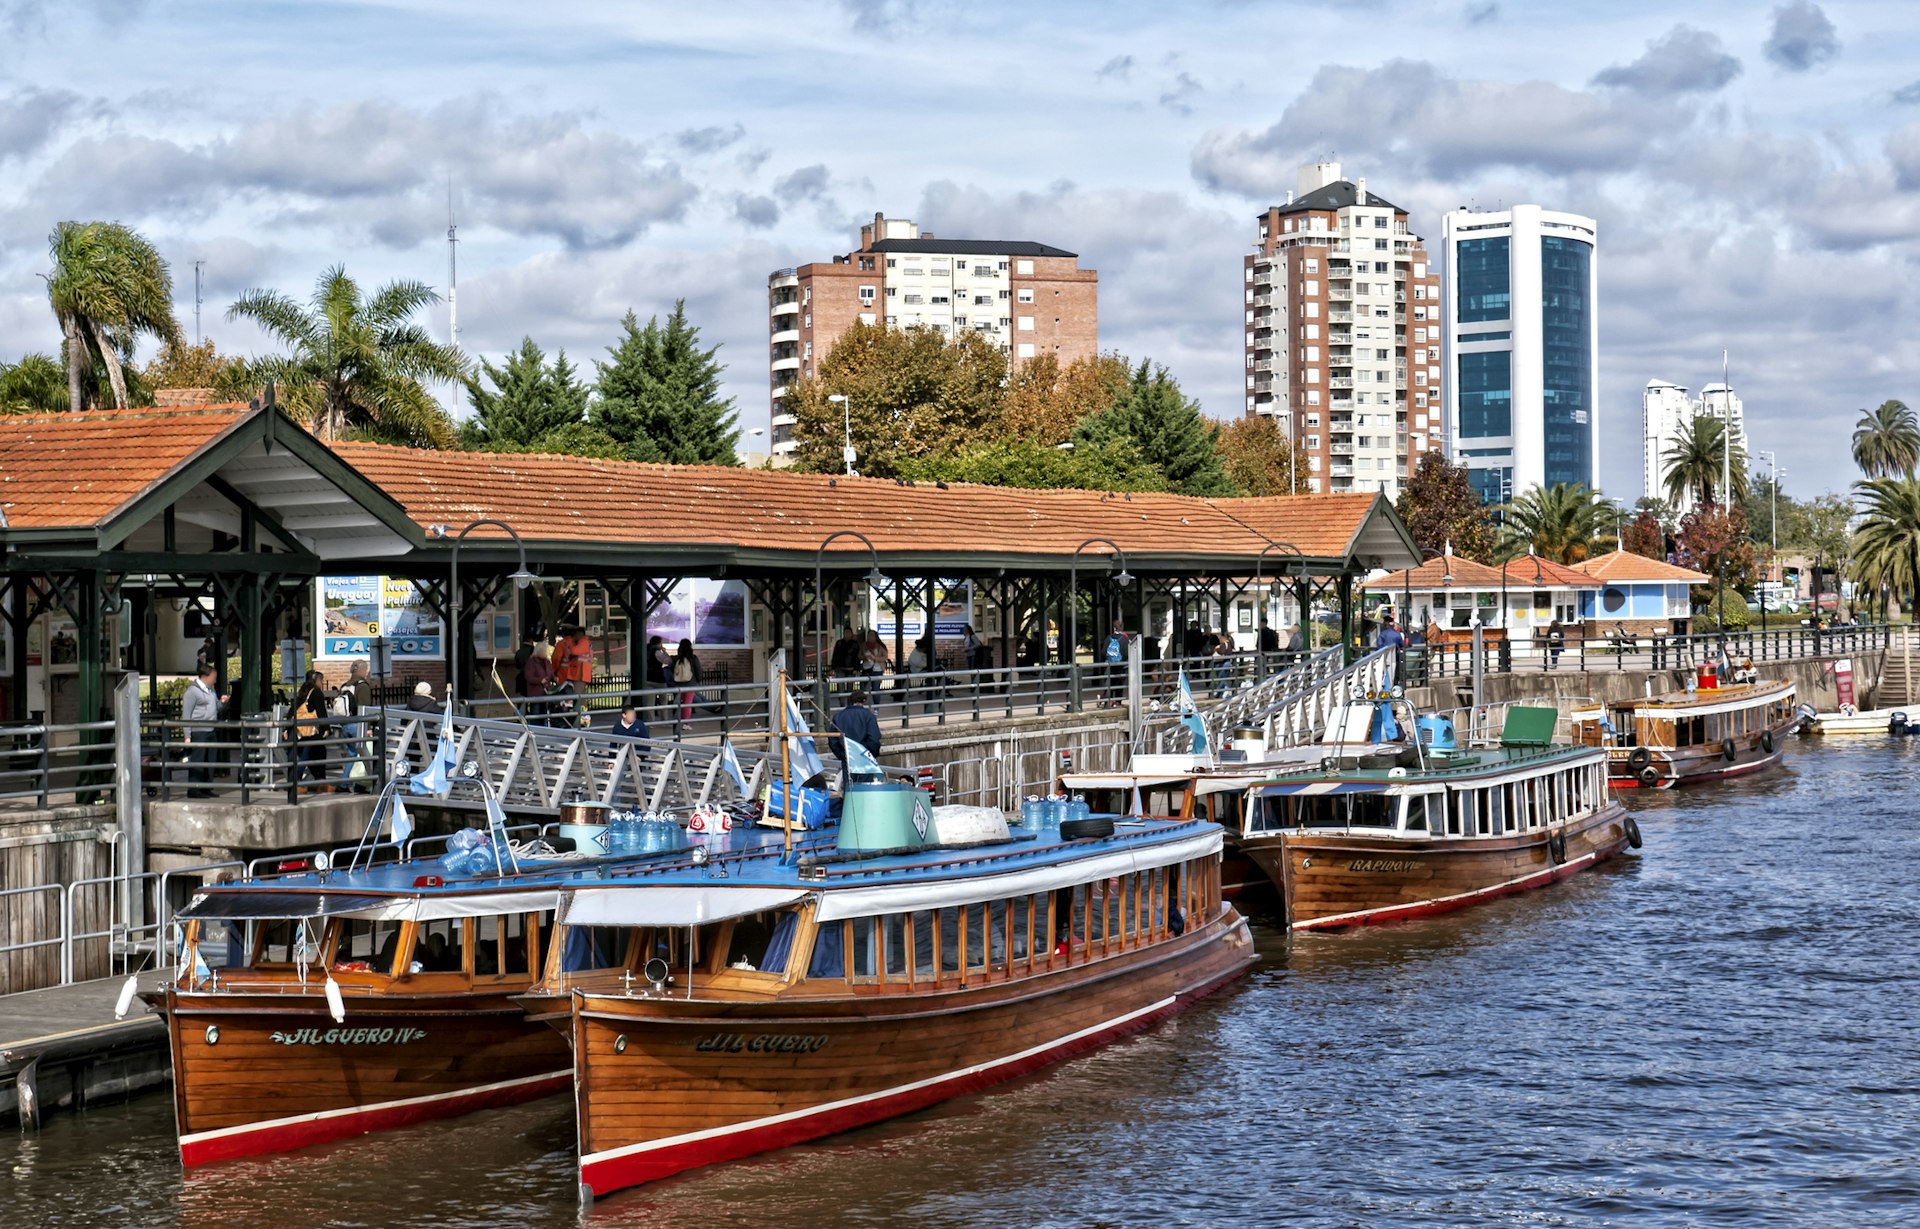 A cityscape of Tigre, showing tourists on a boat-lined wharf.